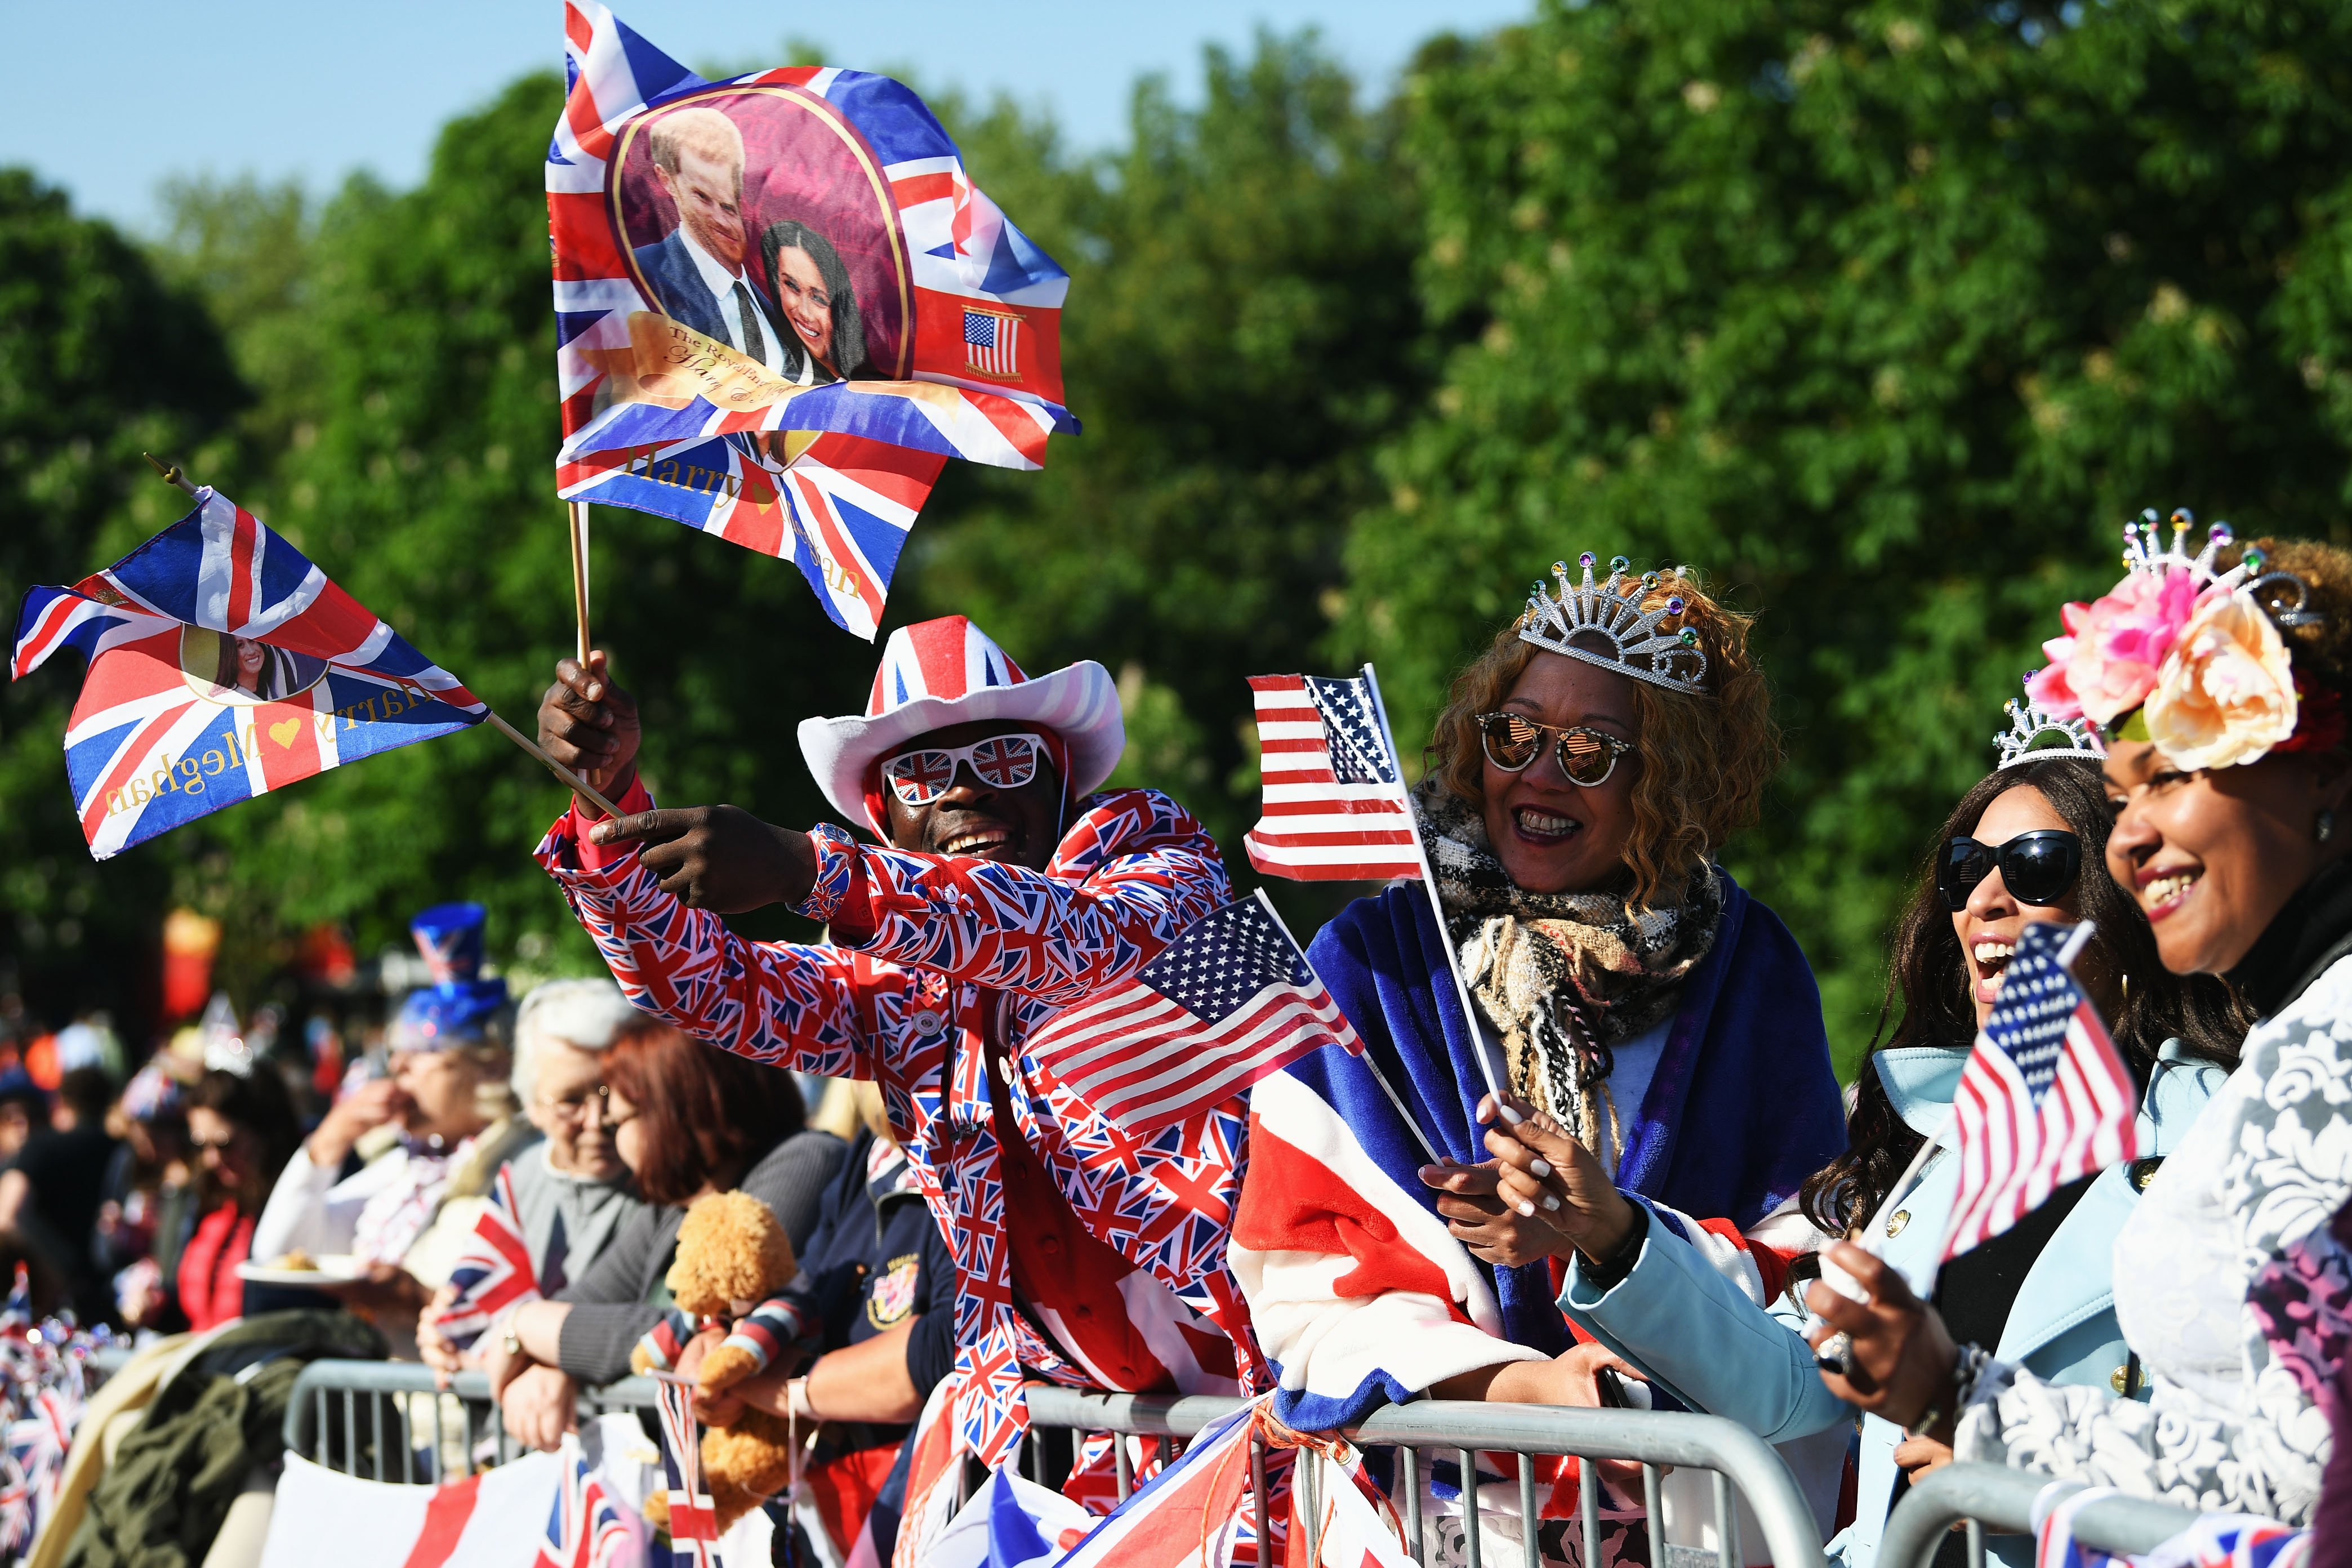 Royal fans celebrating during the wedding of Prince Harry and Meghan Markle on May 19, 2018 in Windsor, England. | Source: Getty Images 